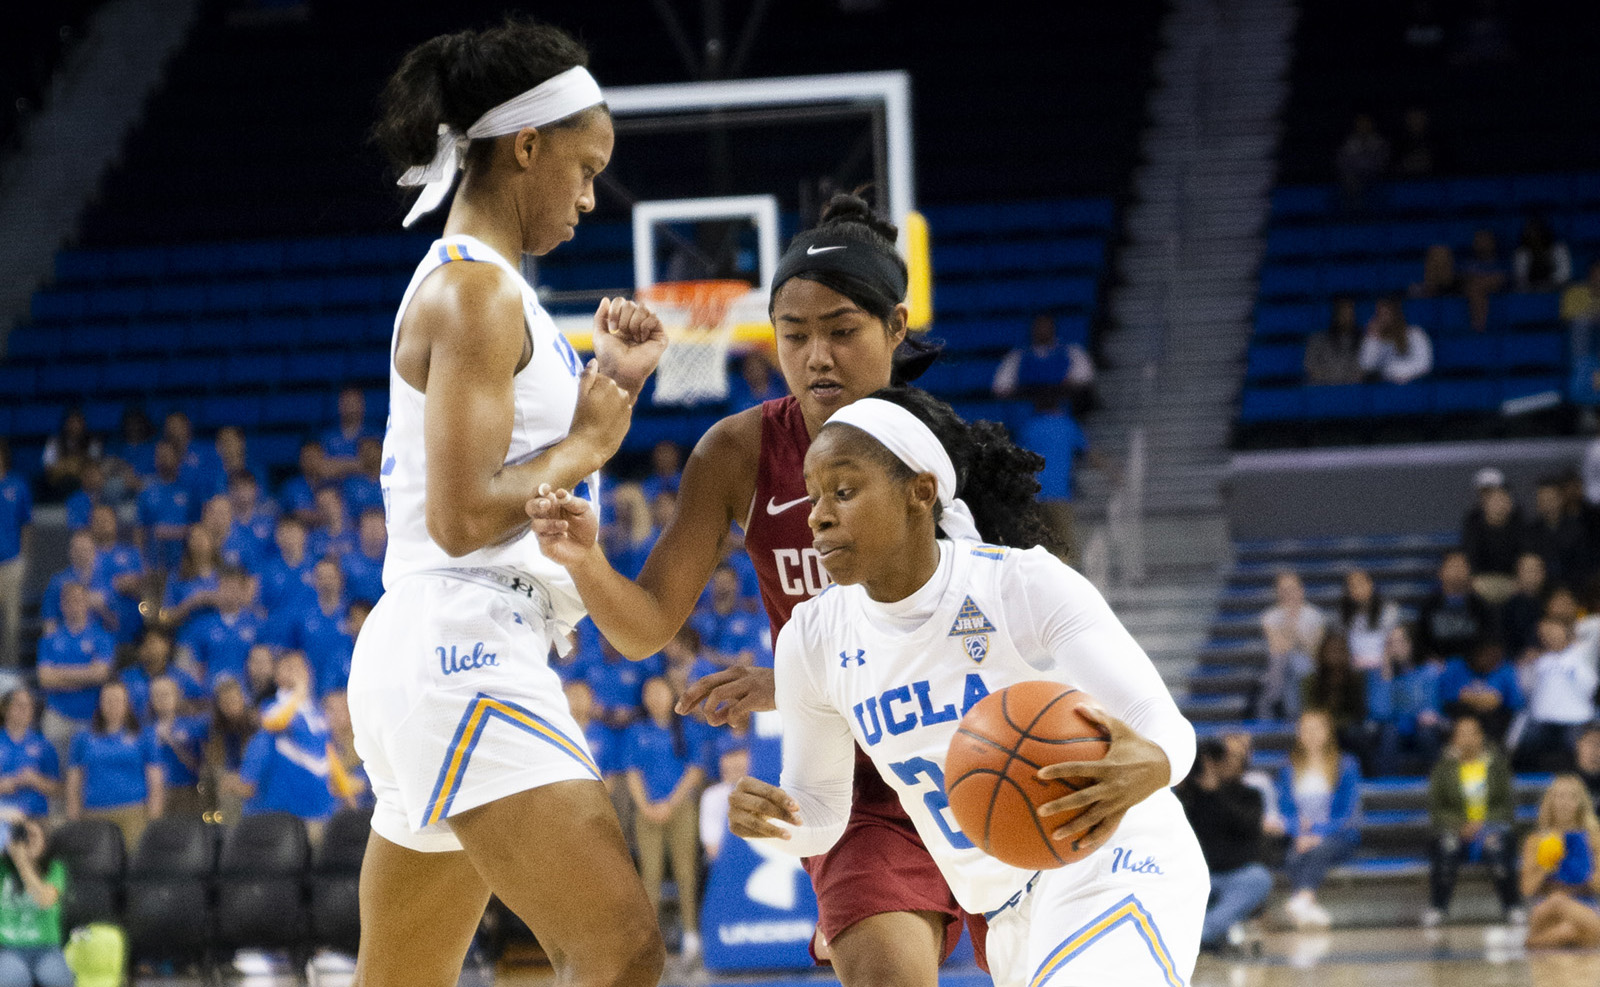 Womens basketballs free throw shooting peaking as it reaches Pac-12 play midpoint